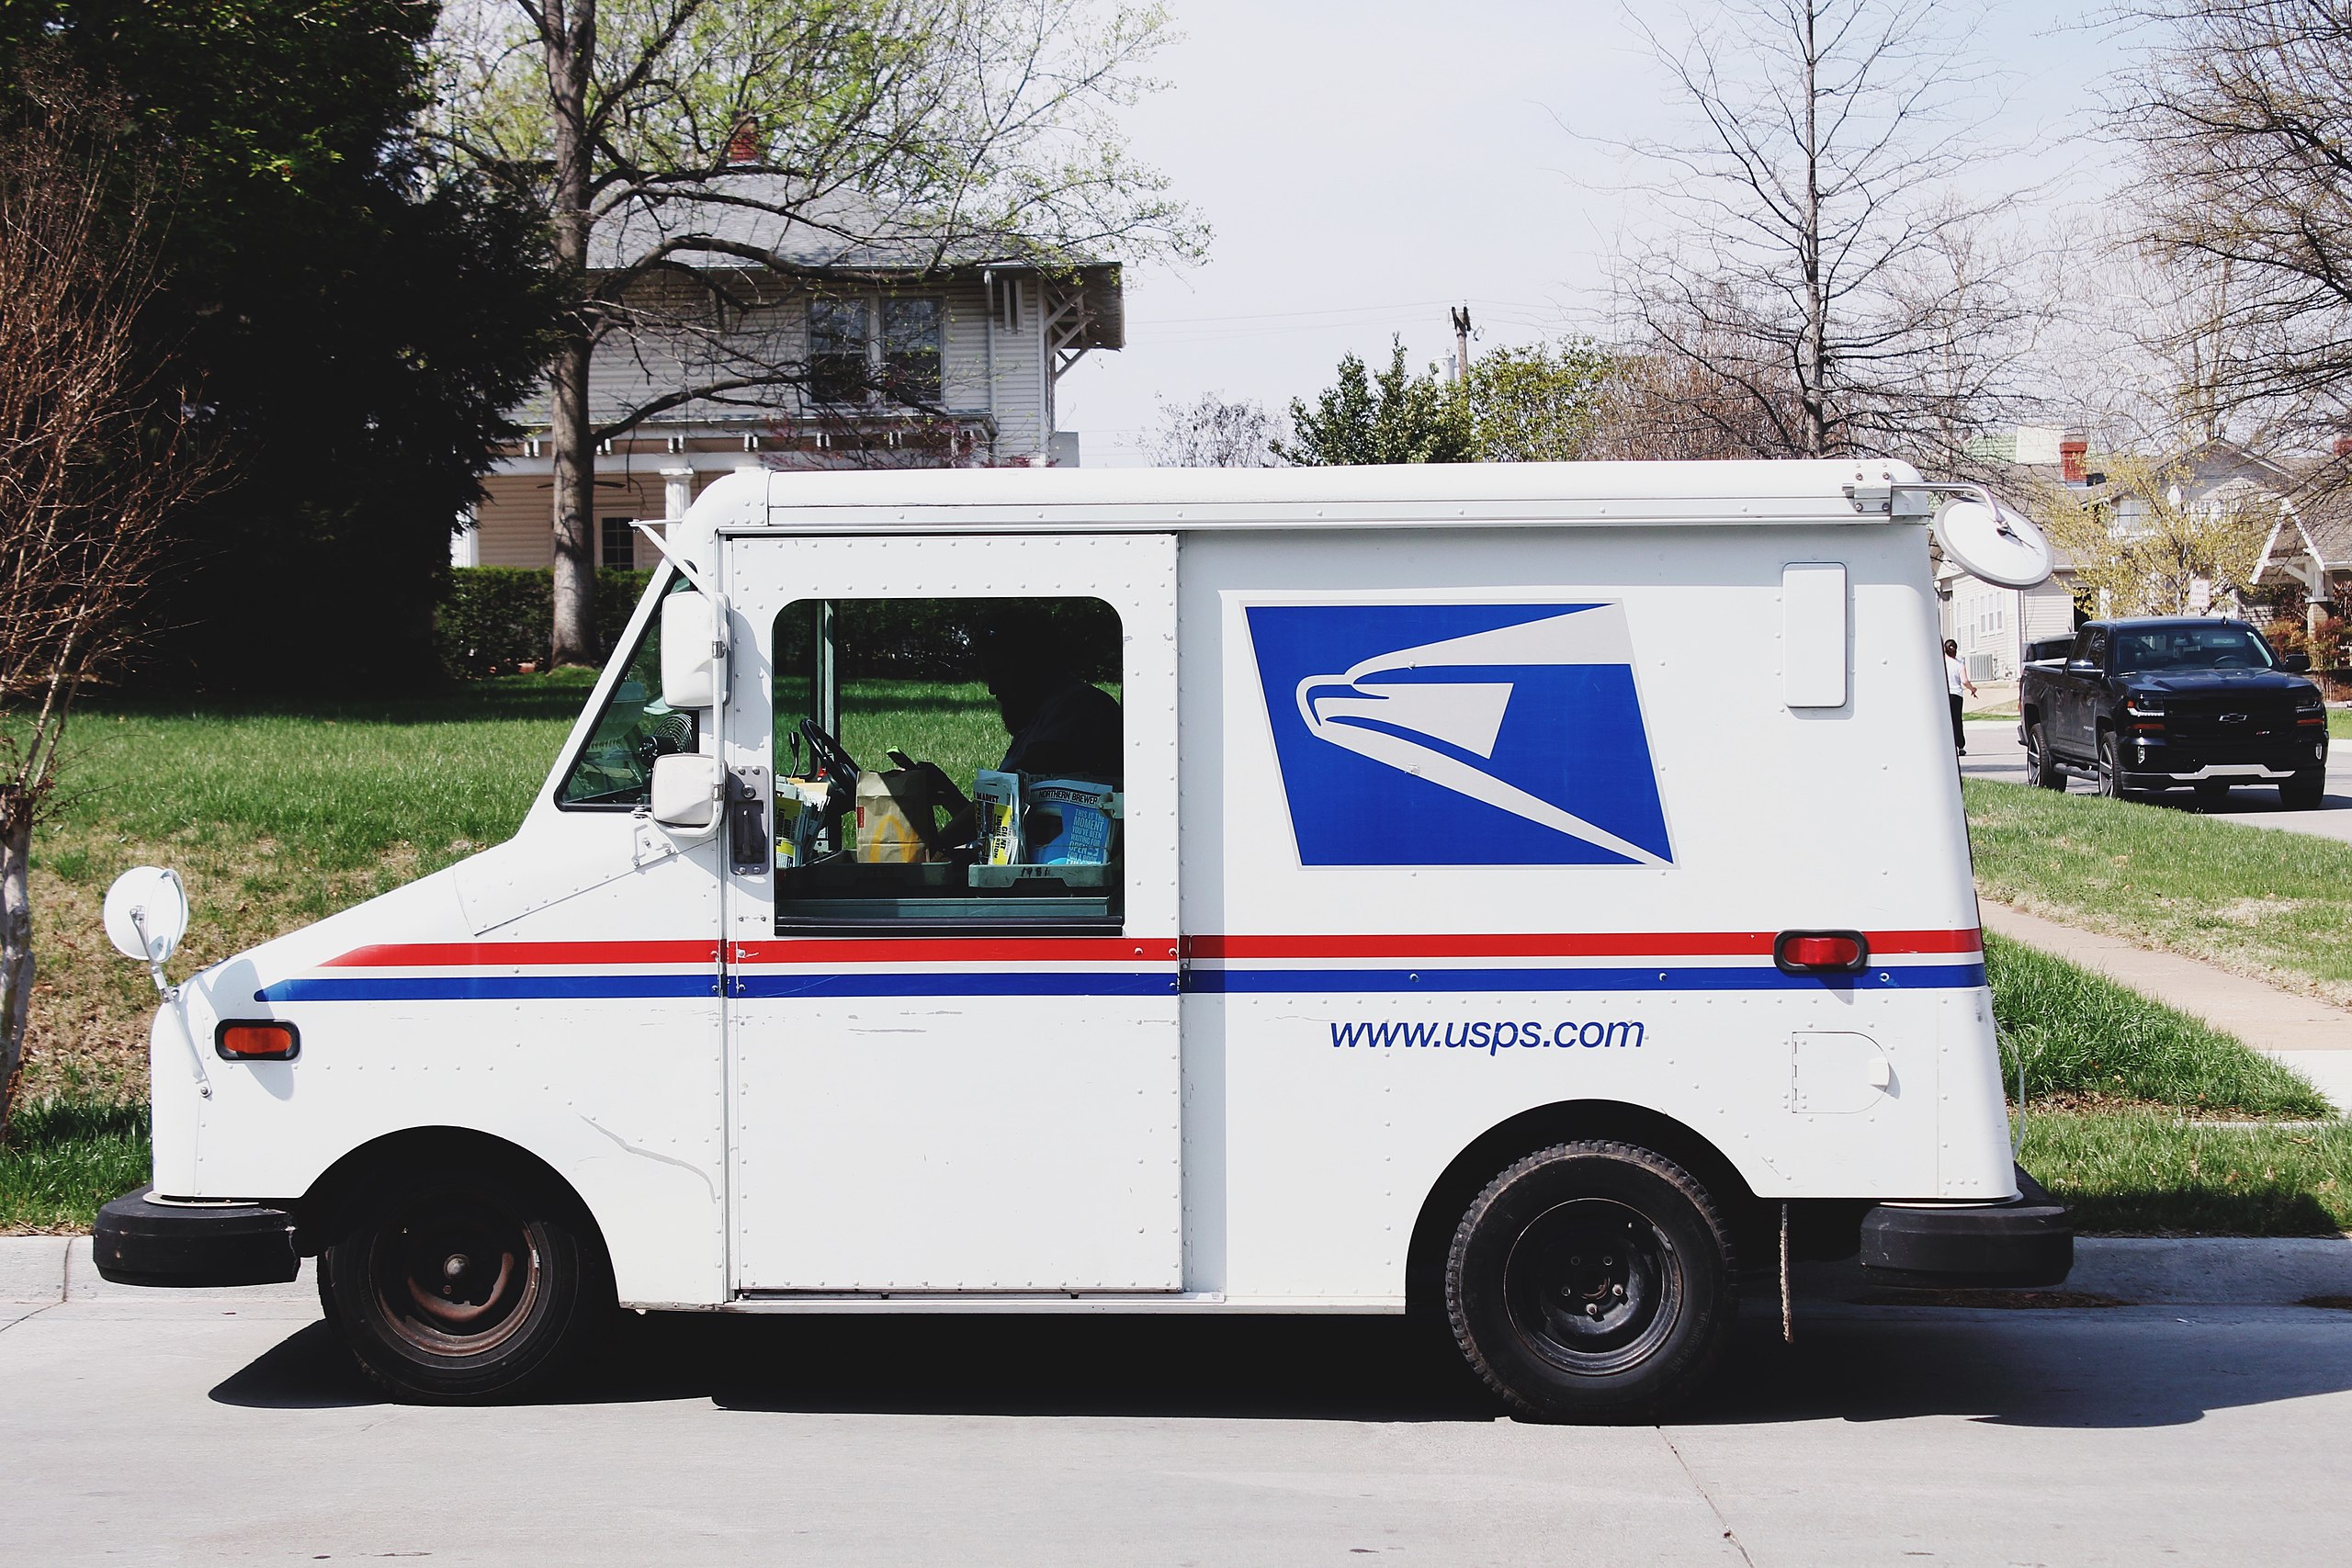 A Grumman LLV mail truck sits in a local neighborhood with USPS livery.